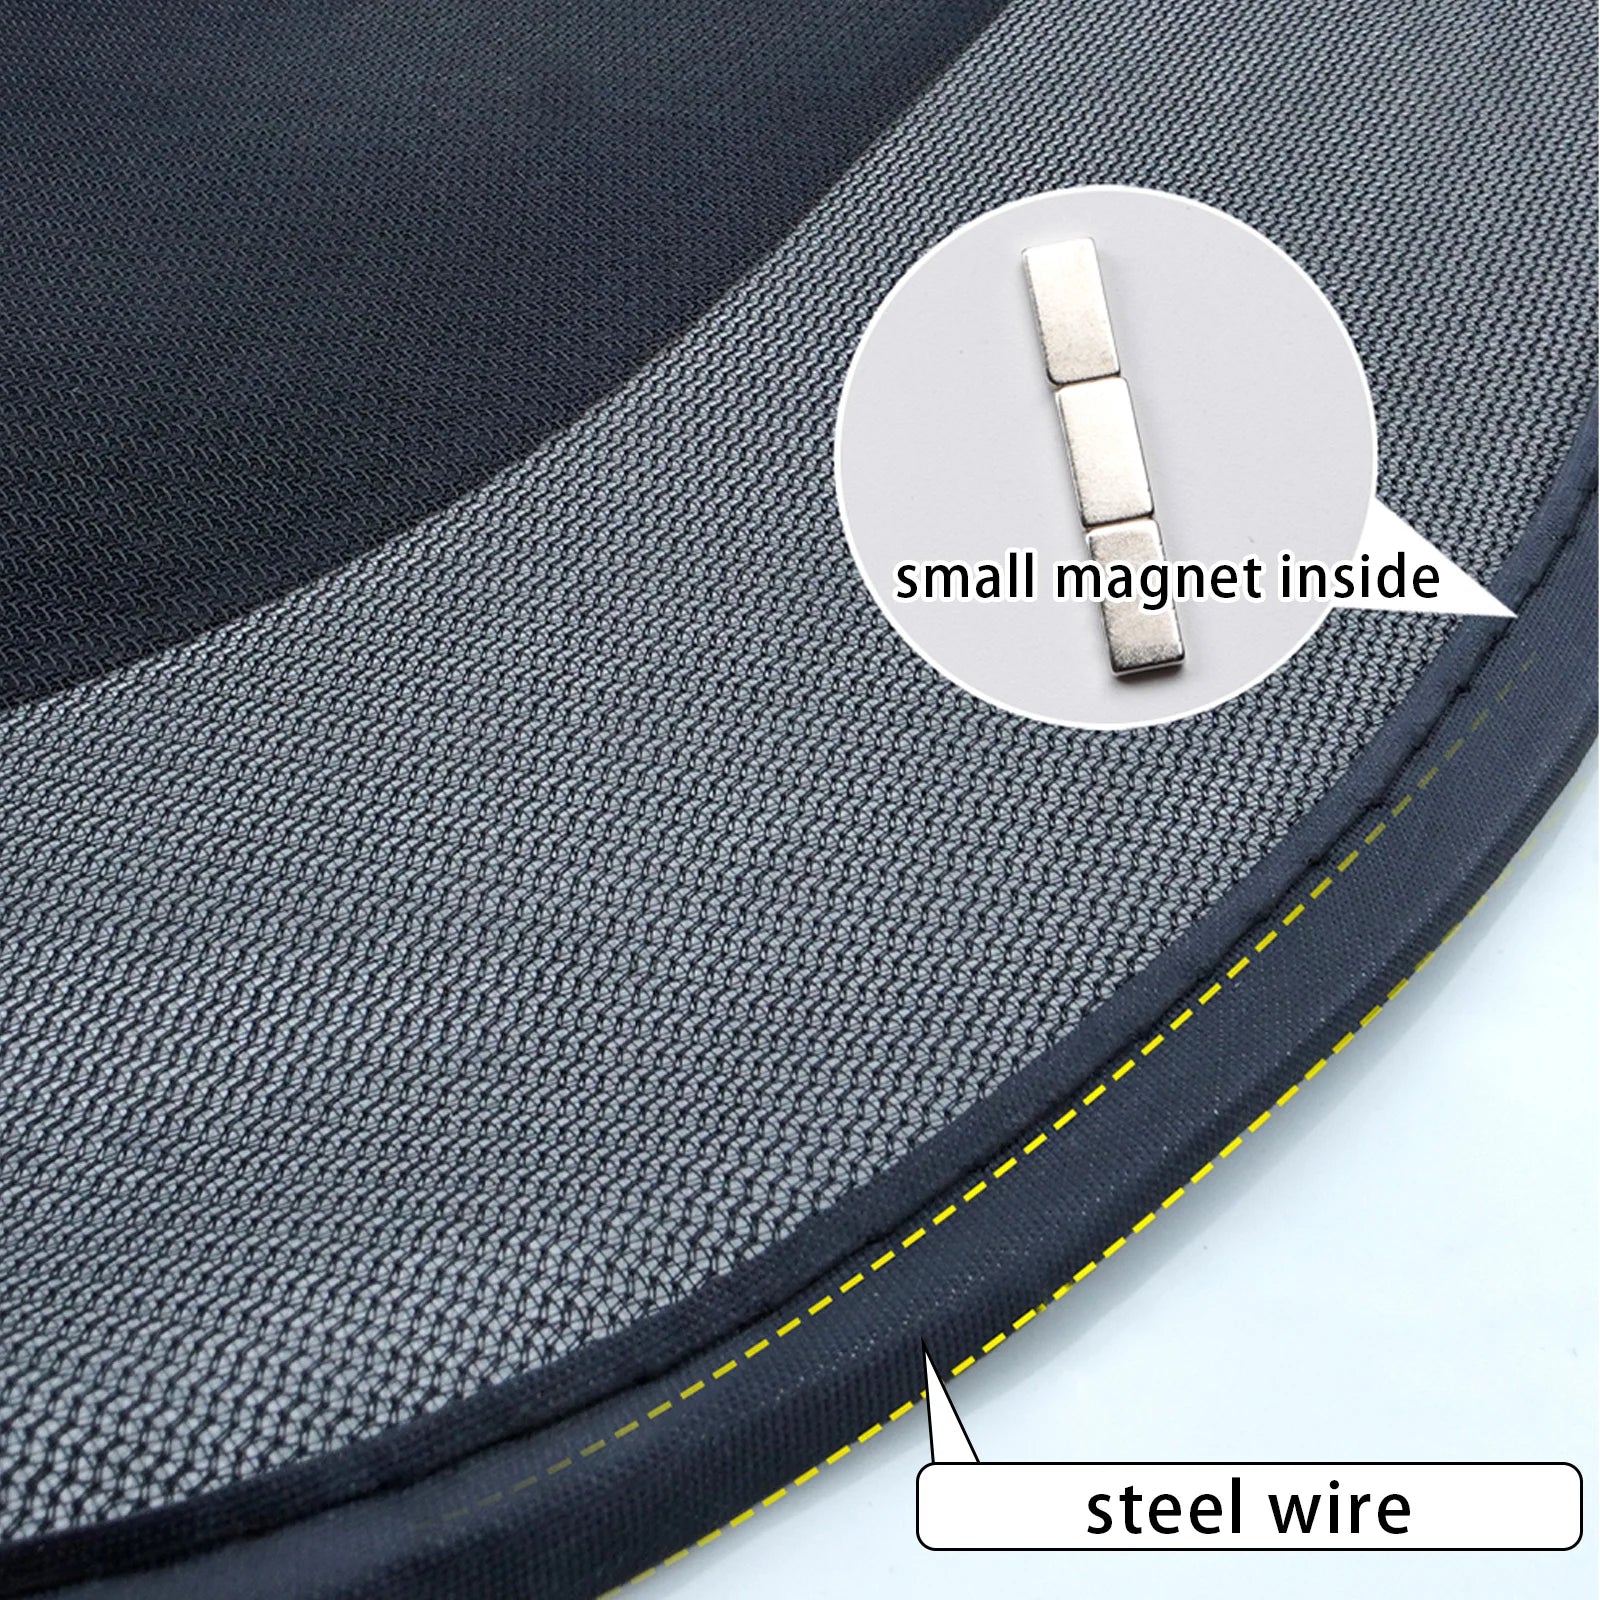 Magnetic Moonroof Sunroof Sun Shade Mesh Car Roof Awnings Cover Camping Kept The Bugs Out Screen Anti-Mosquito Trips SUV Tent